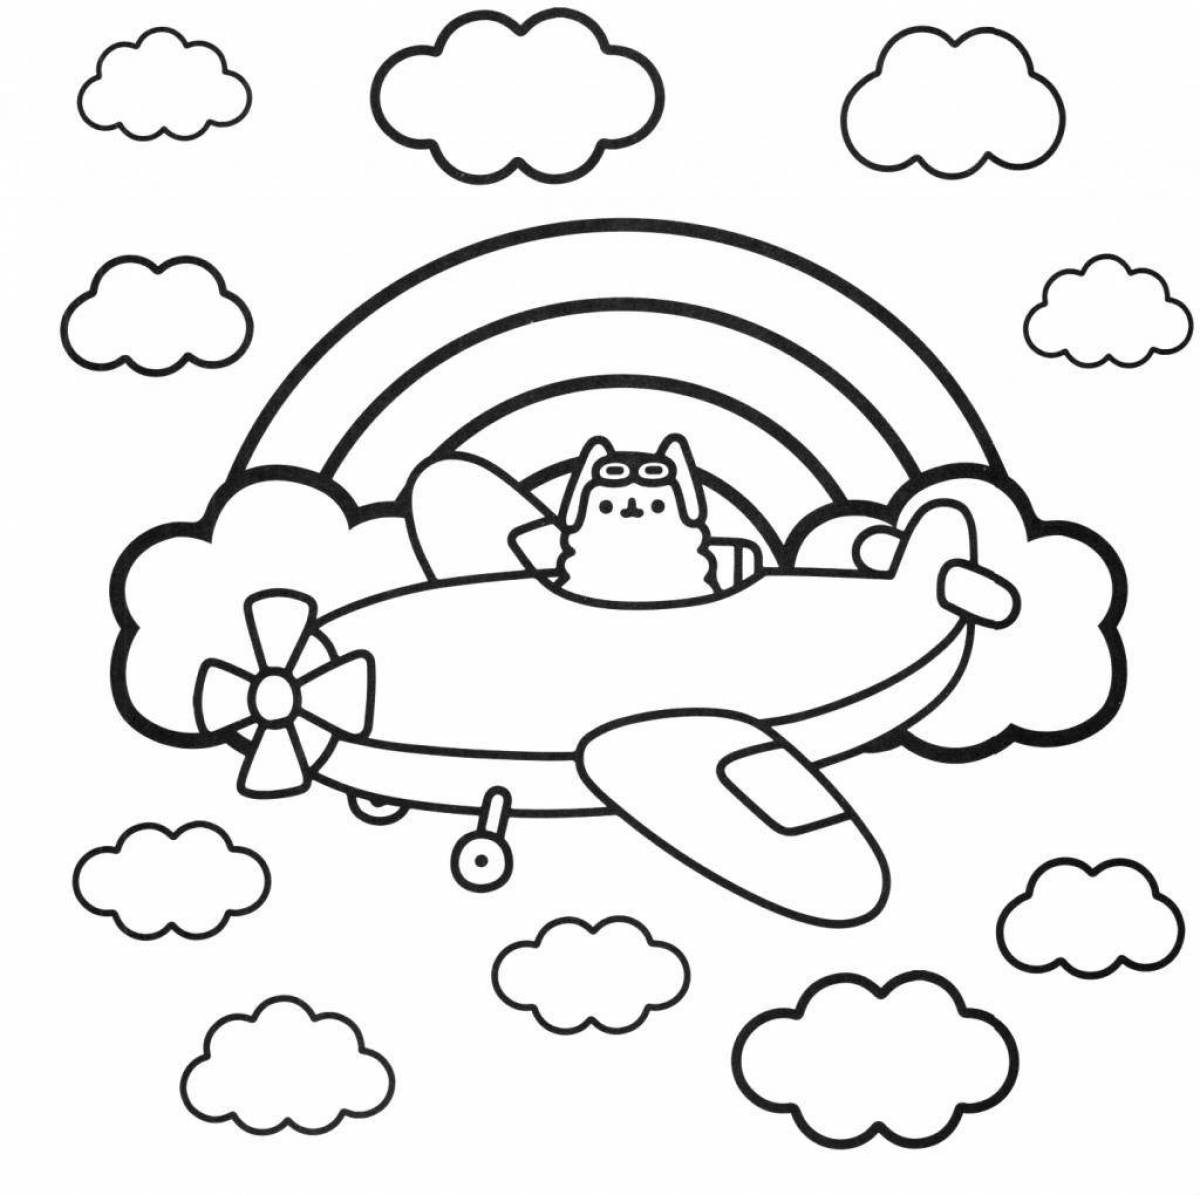 Pusheen live coloring page